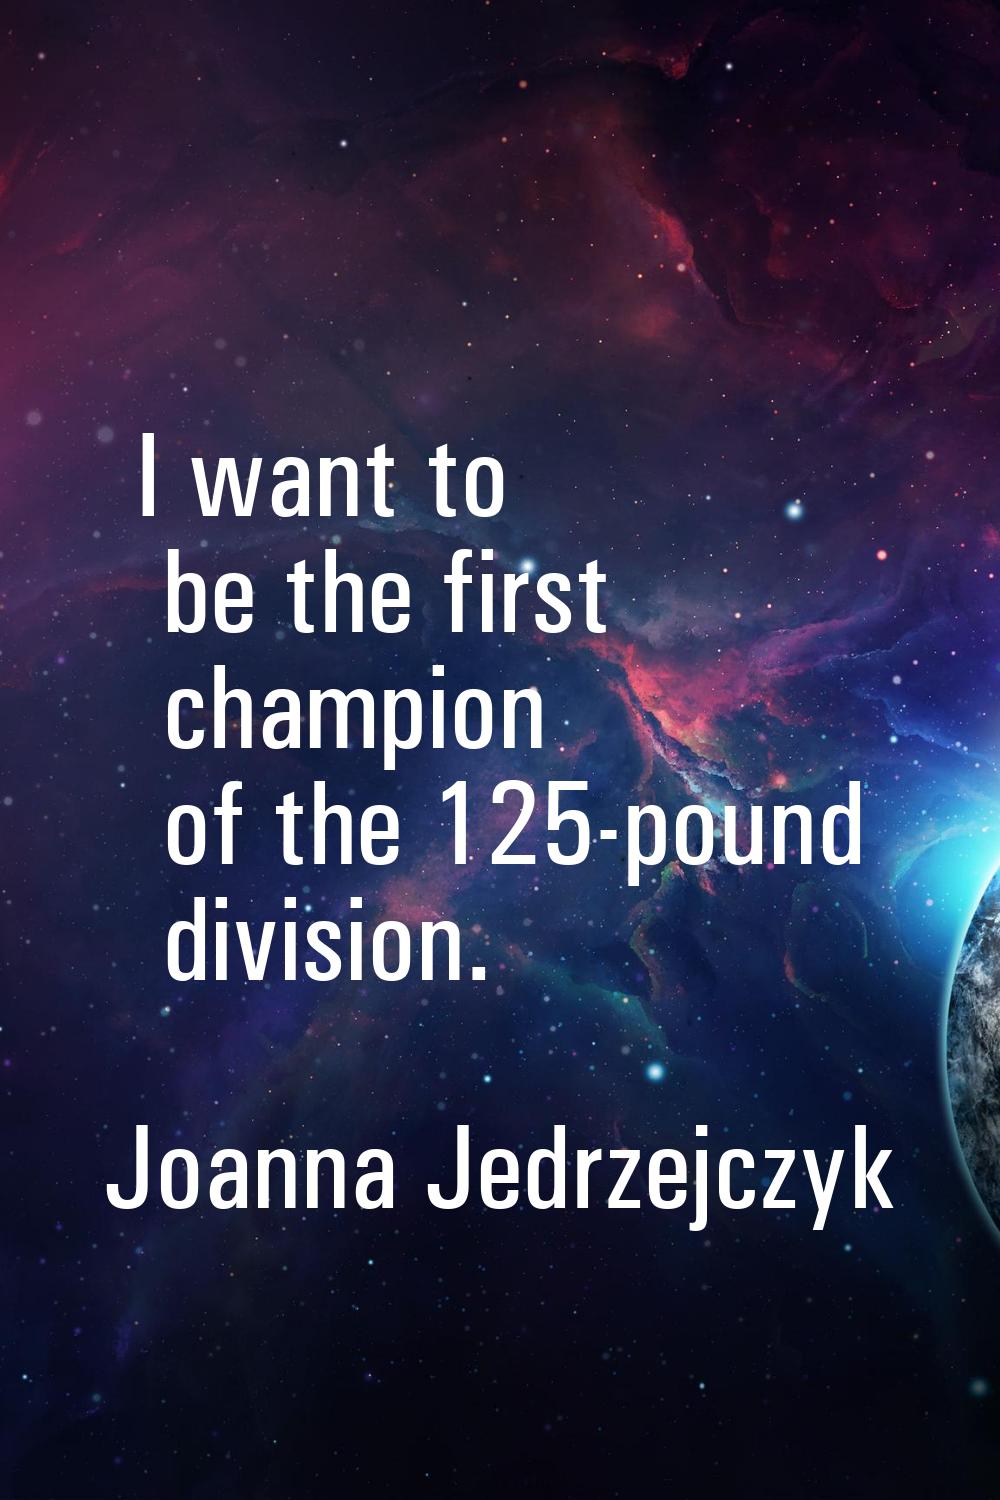 I want to be the first champion of the 125-pound division.